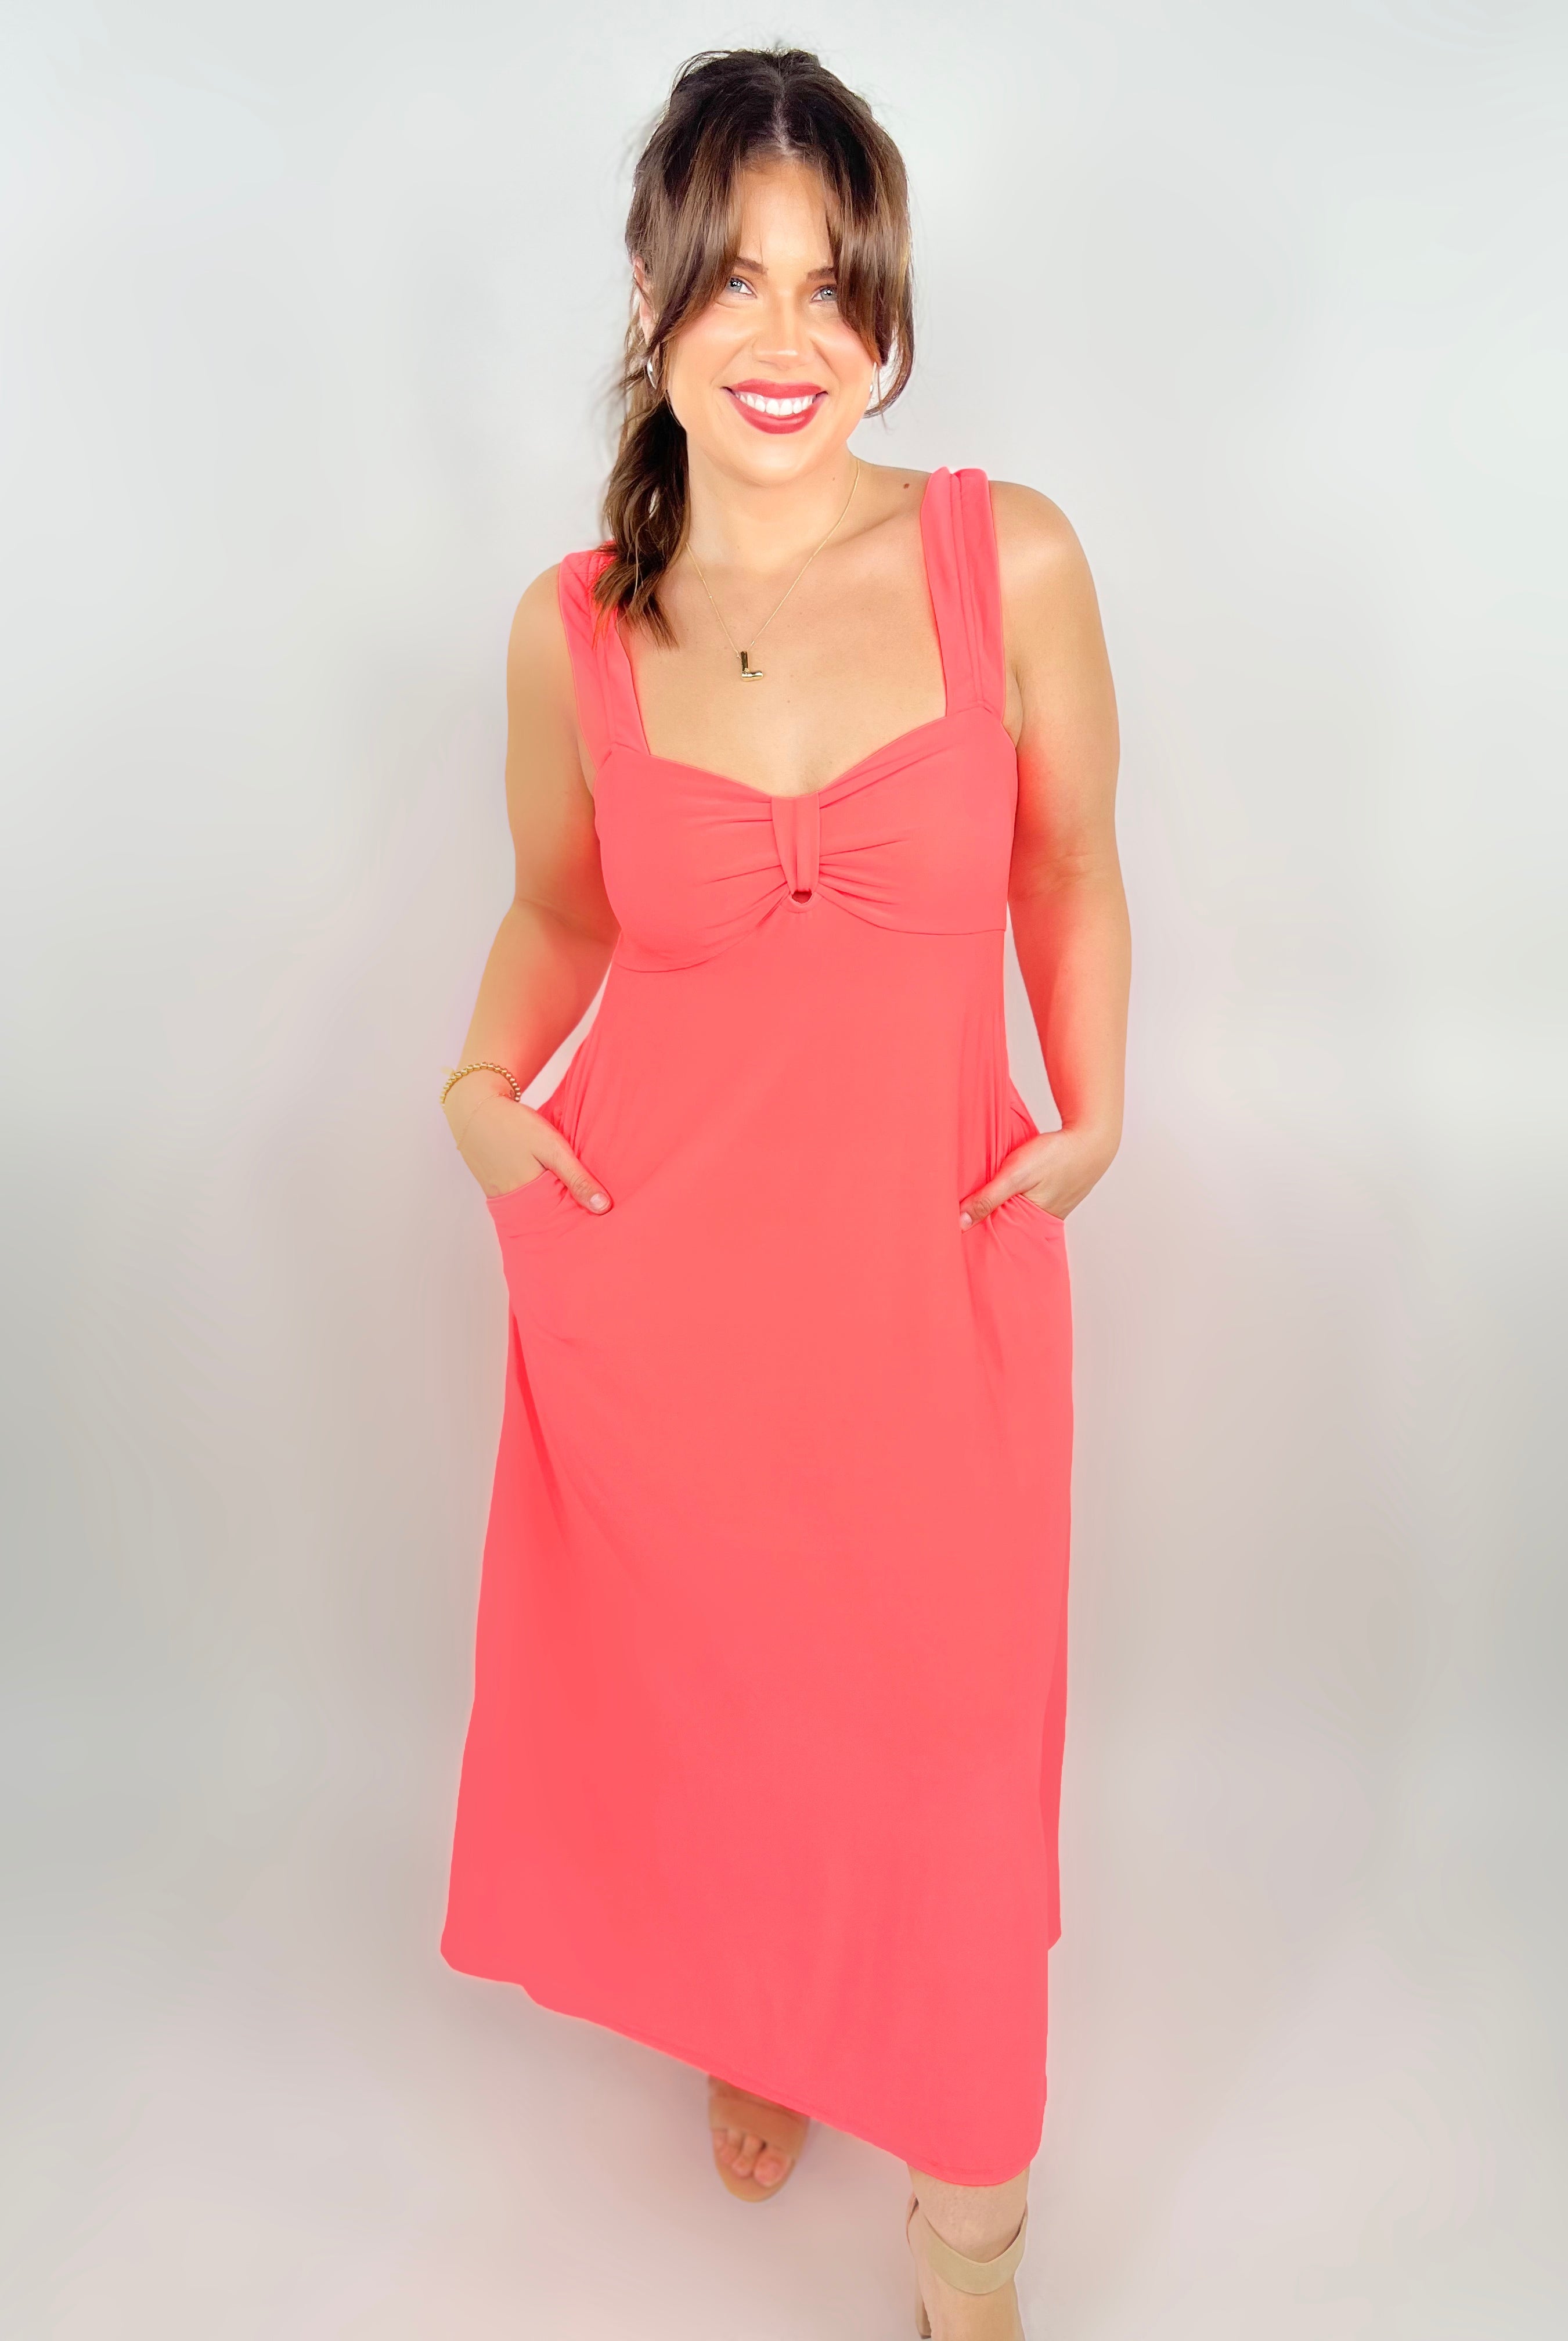 Horizon Midi Dress-230 Dresses/Jumpsuits/Rompers-Sew In Love-Heathered Boho Boutique, Women's Fashion and Accessories in Palmetto, FL